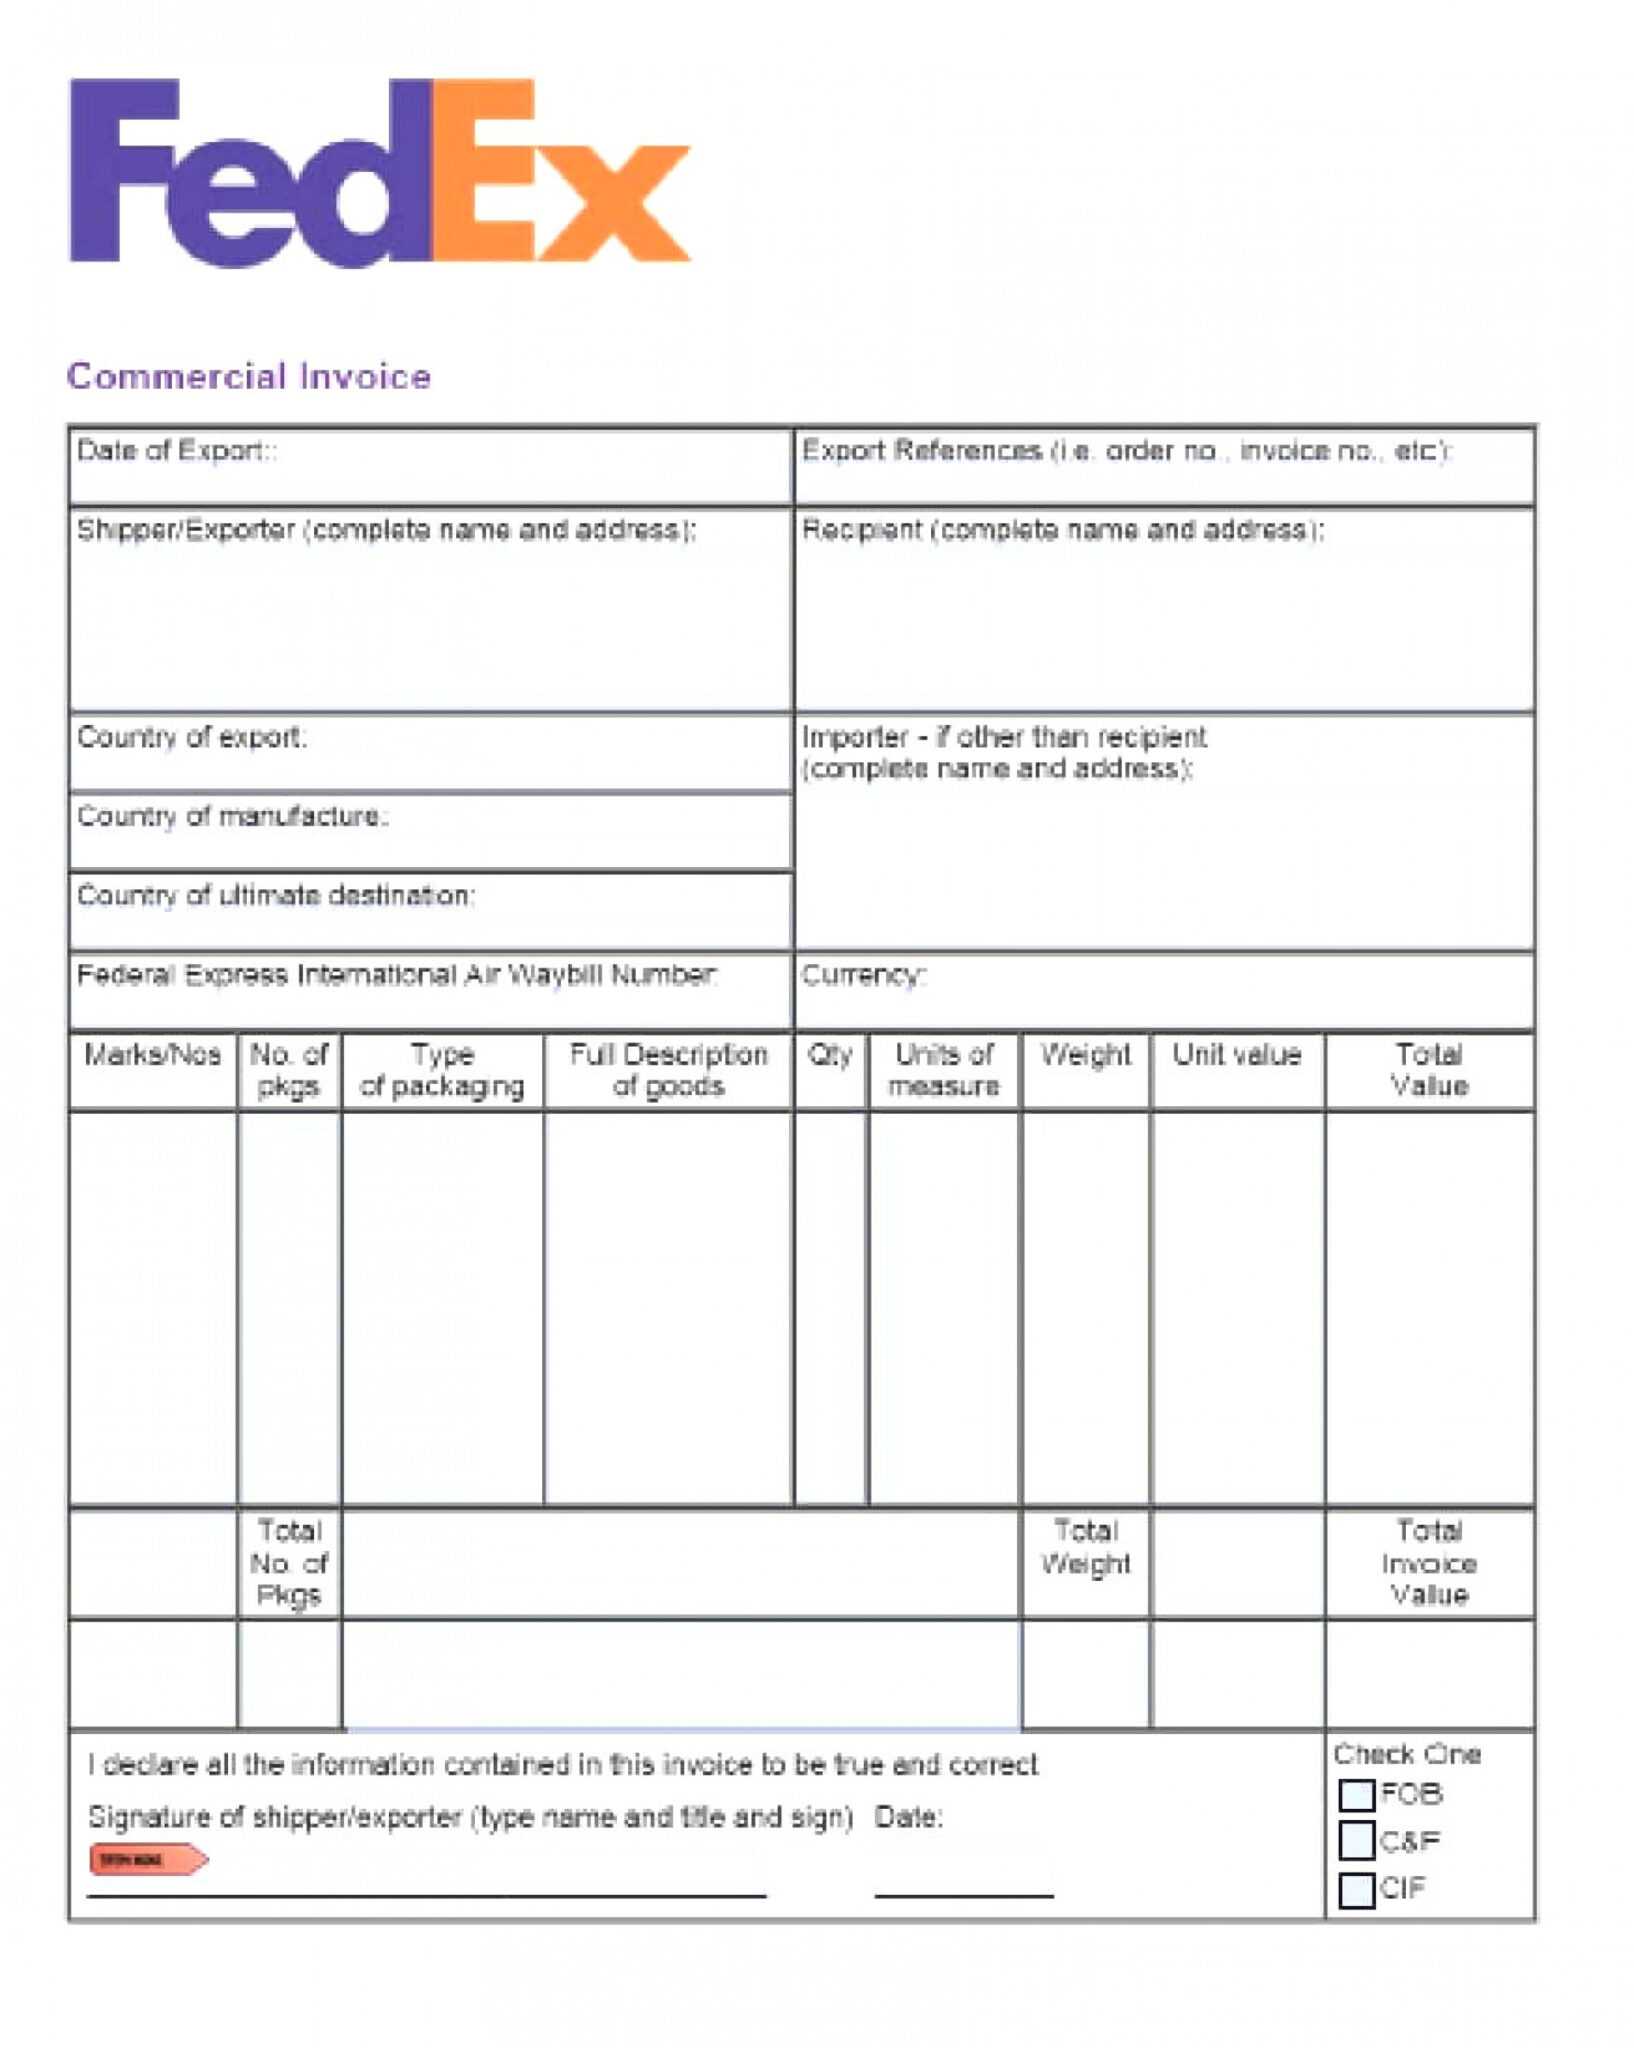 commercial-invoice-template-word-doc-atlantaauctionco-inside